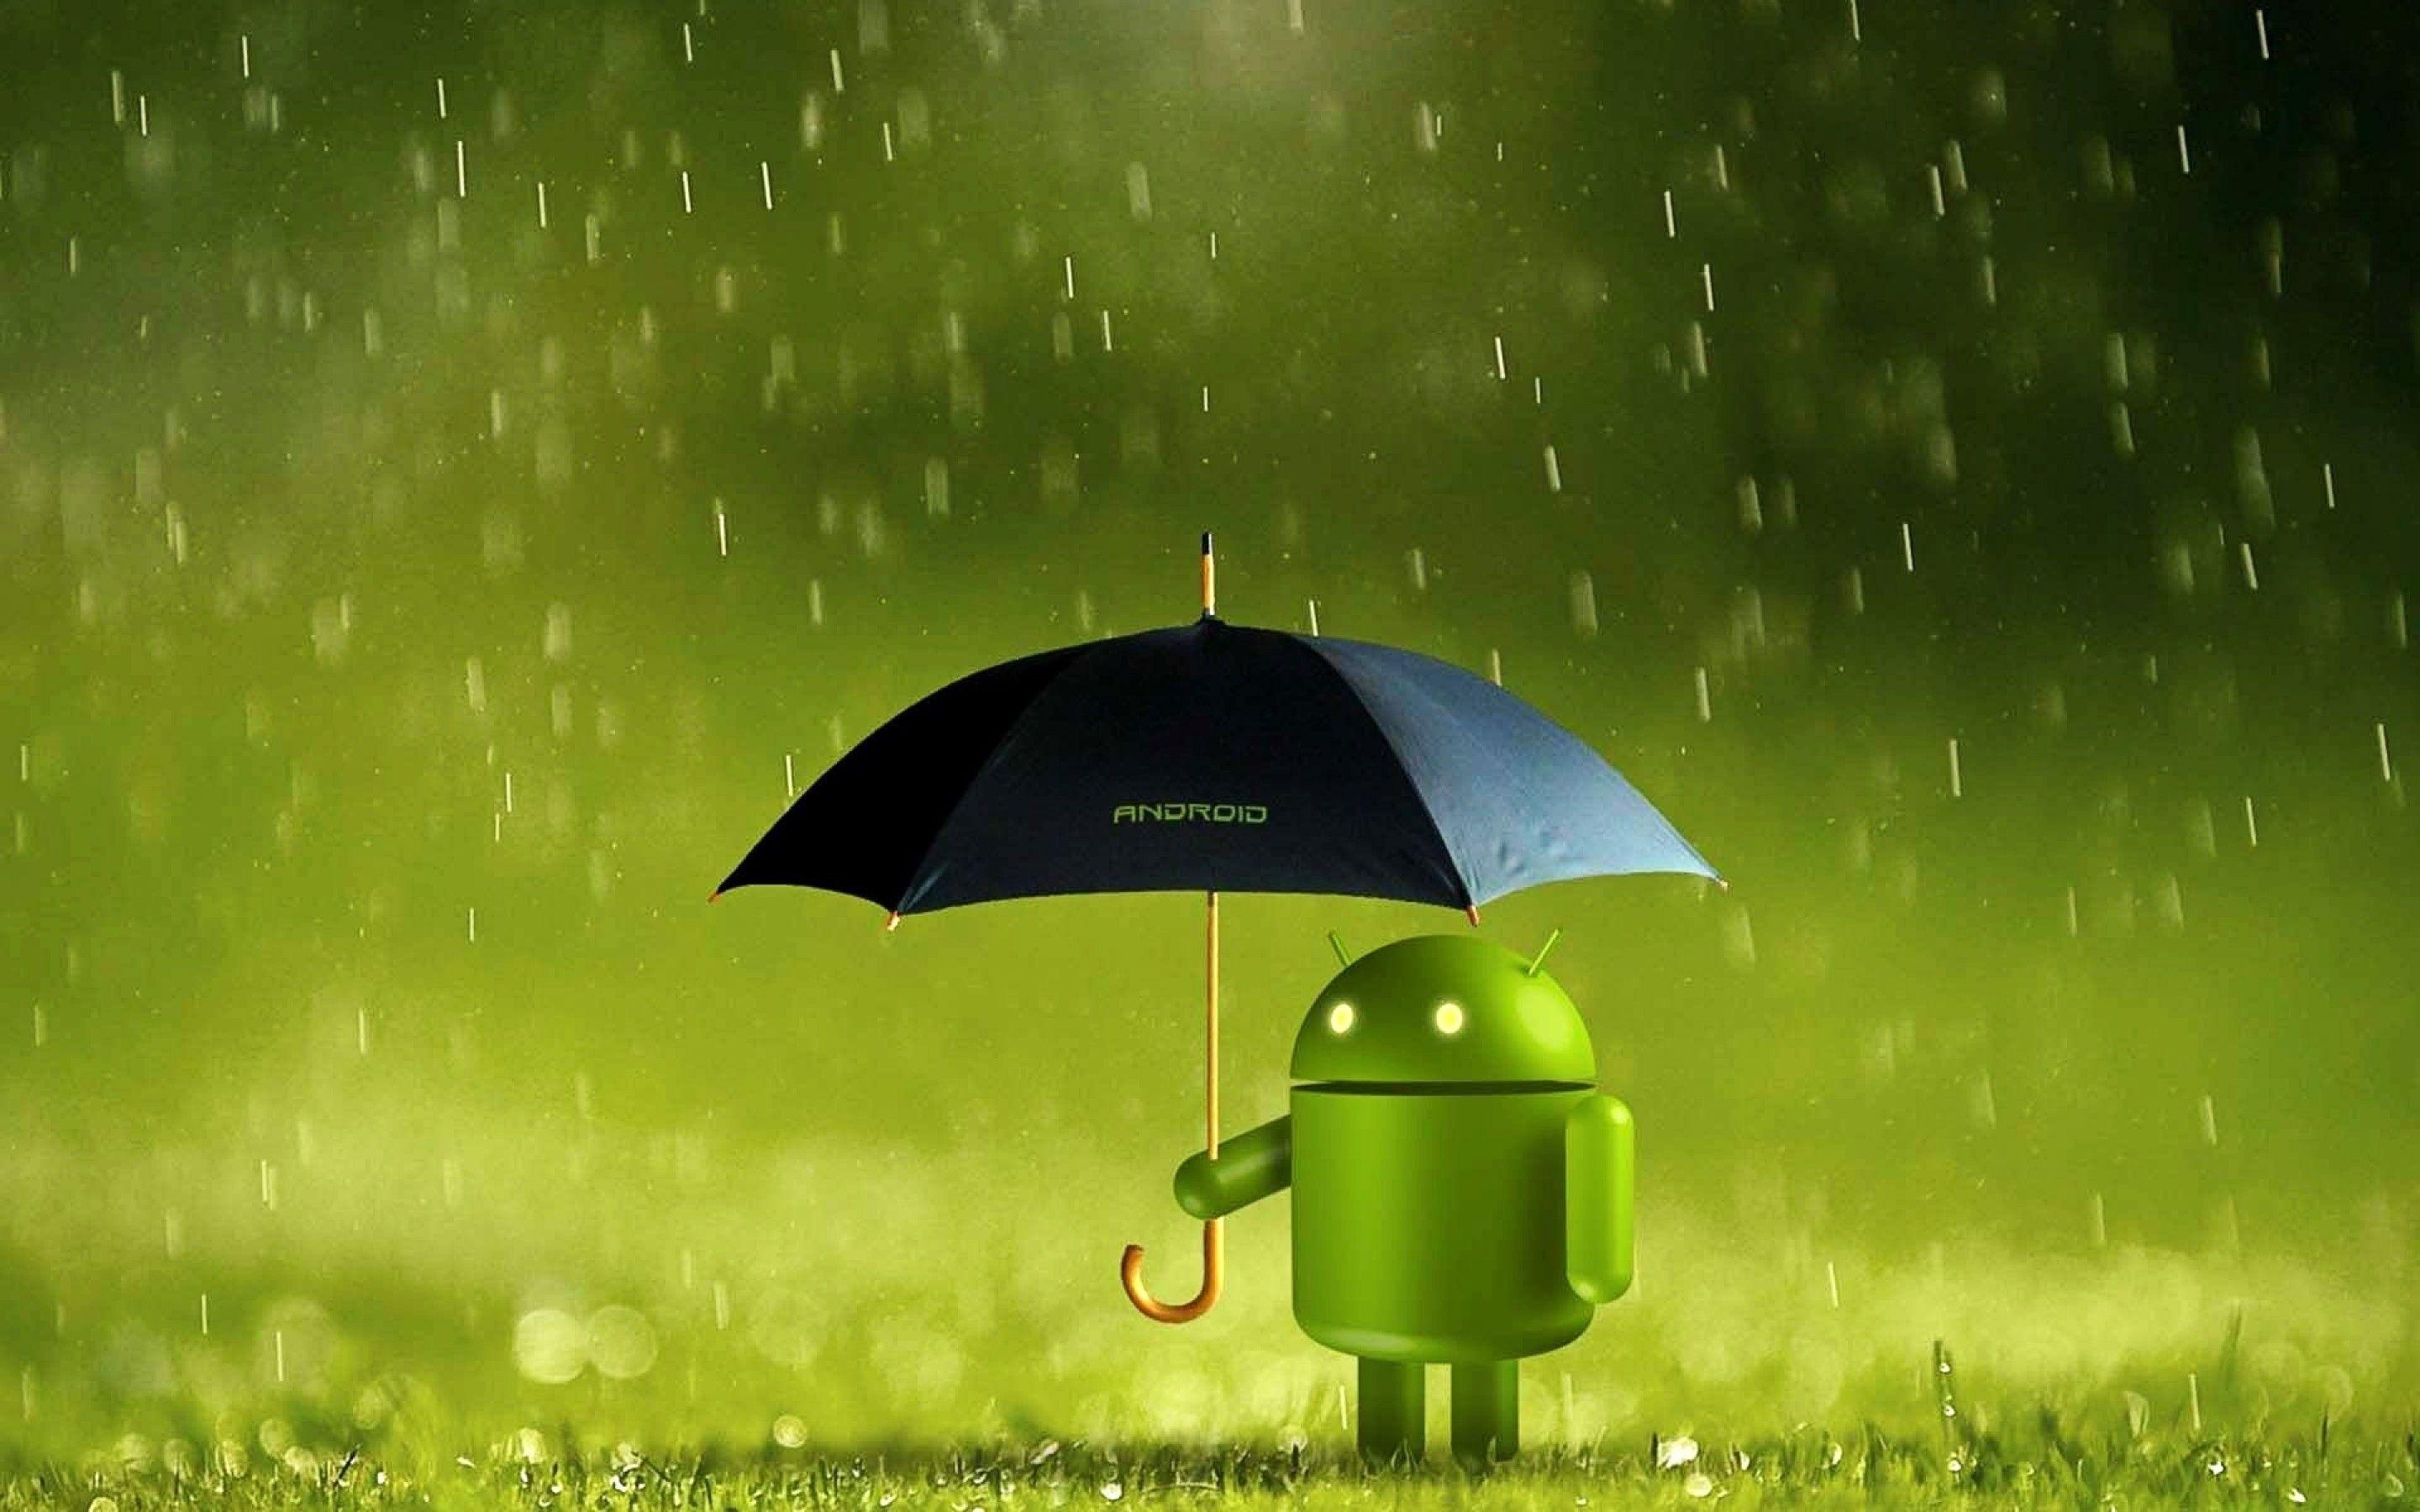 android logo HD wallpaper 04. Papidroid: Android games without